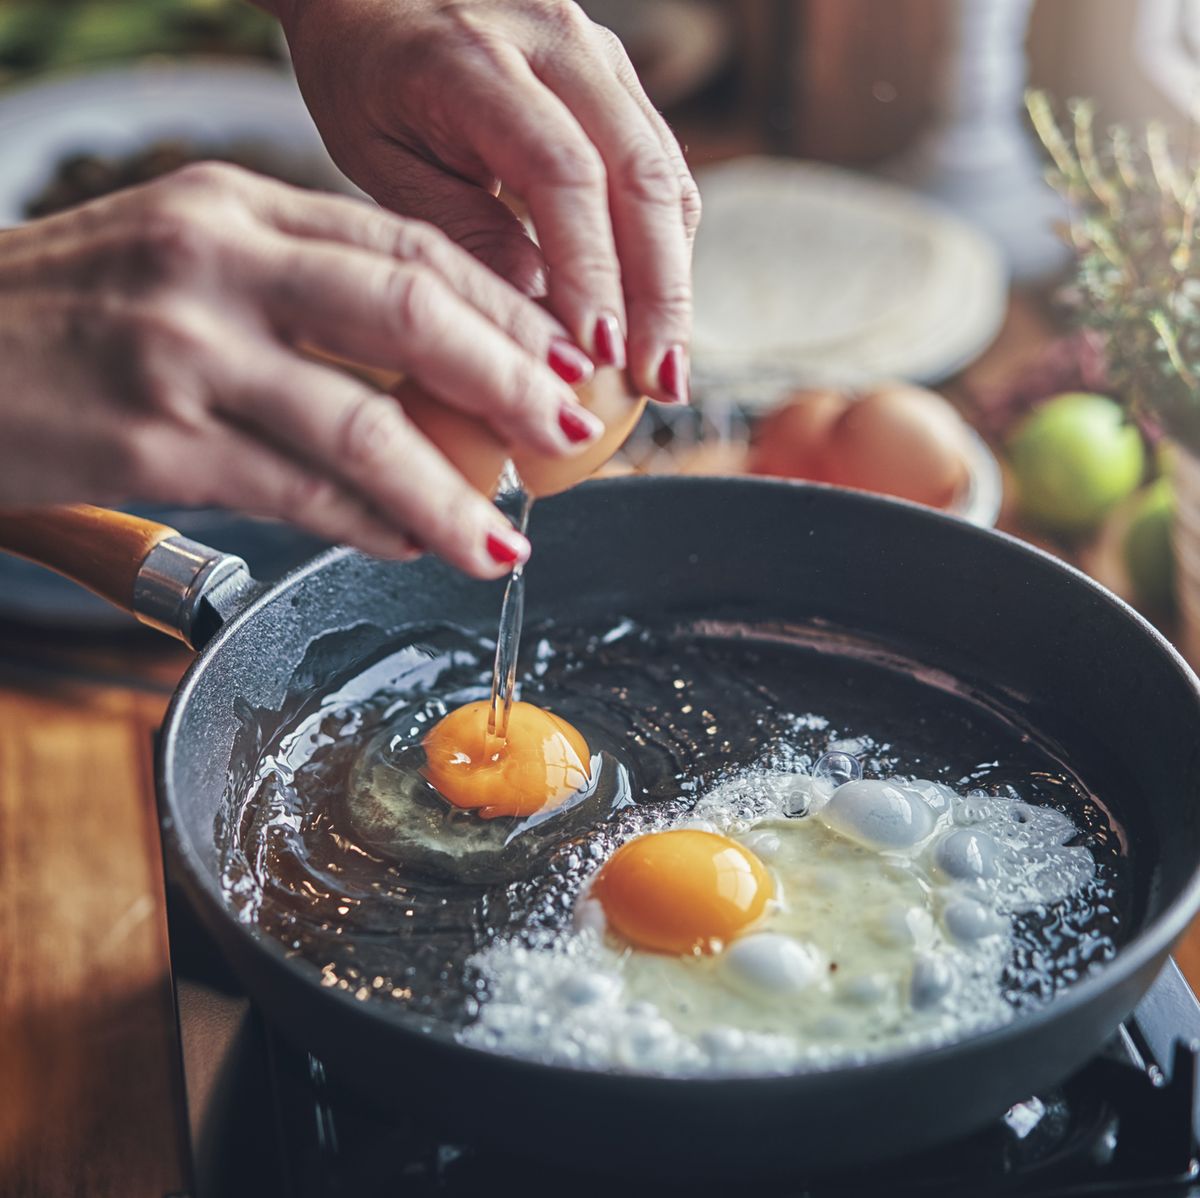 https://hips.hearstapps.com/hmg-prod/images/frying-egg-in-a-cooking-pan-in-domestic-kitchen-royalty-free-image-1129381764-1566925040.jpg?crop=0.668xw:1.00xh;0.167xw,0&resize=1200:*